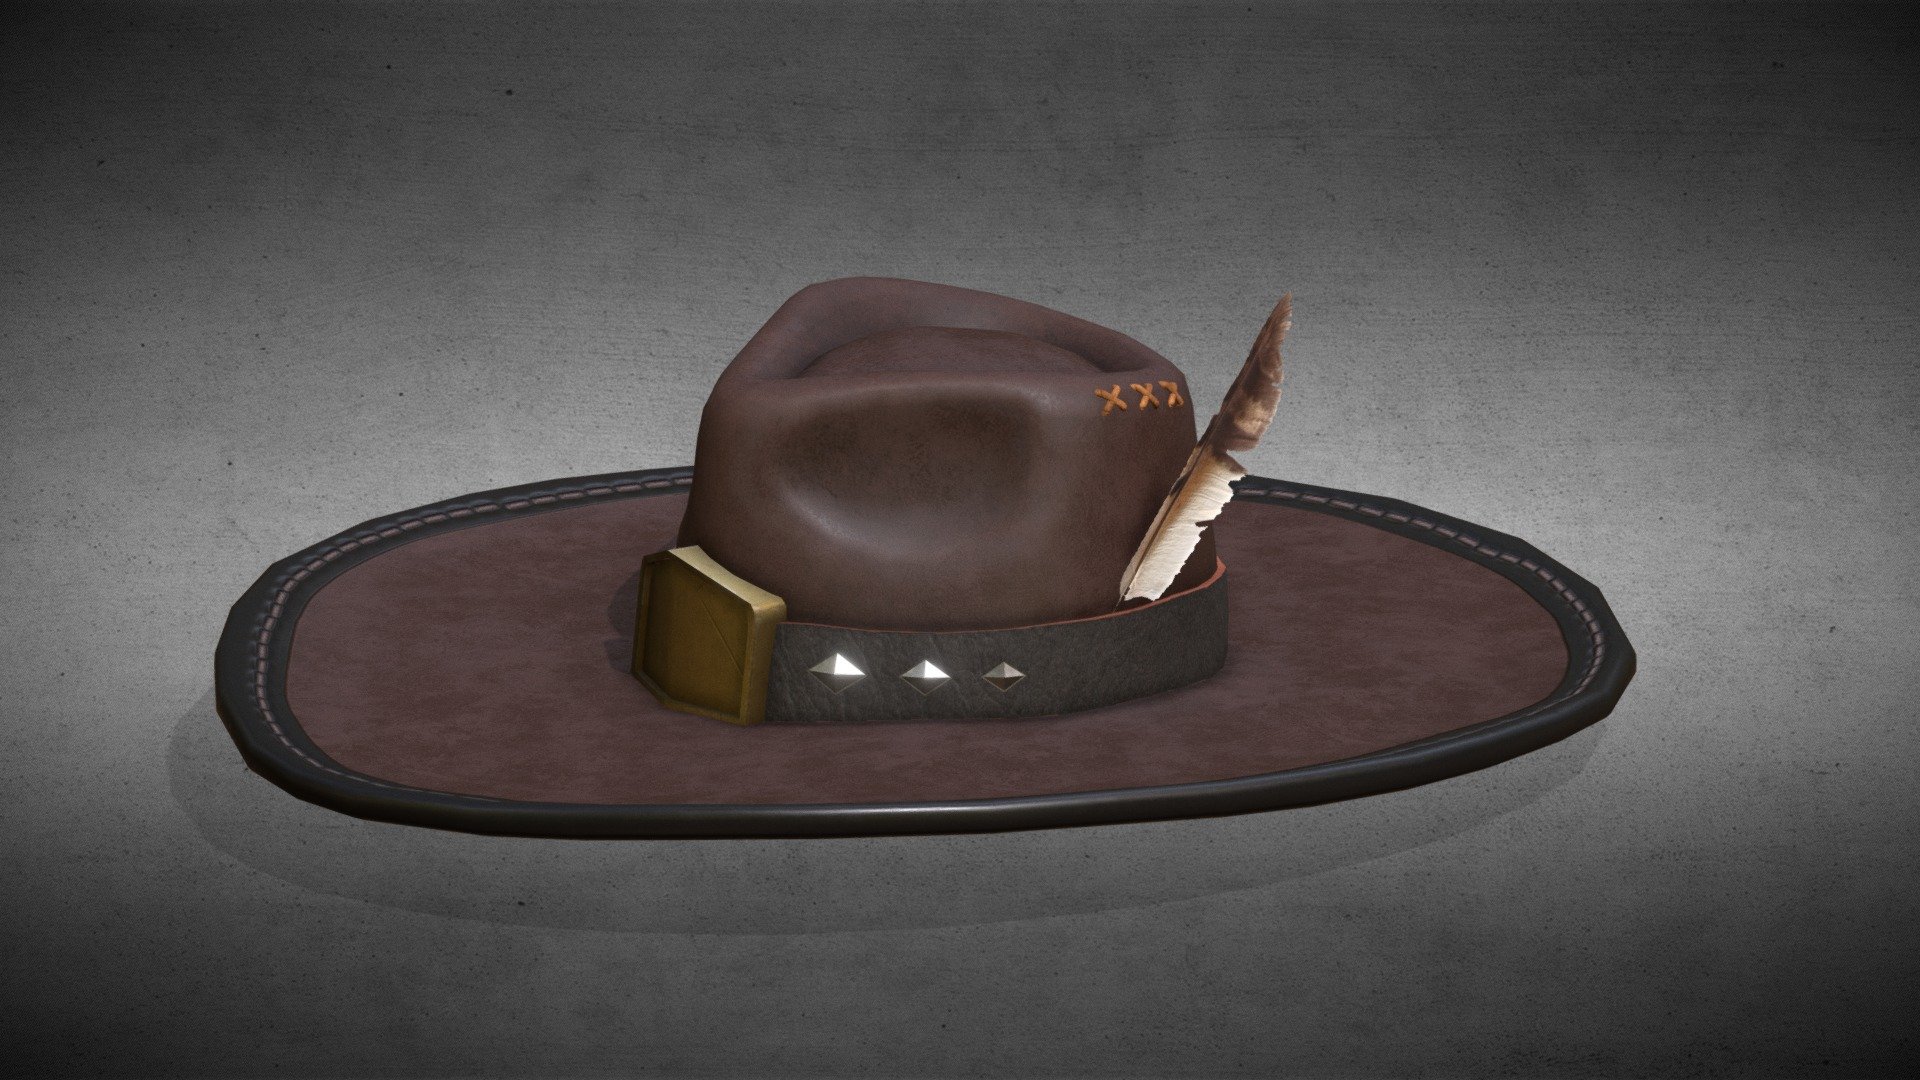 western Cowboy Leather Hat with feather Made with Blender.

Textures with Substance Painter.
* Base Color 2048x2048
* Metalness 2048x2048
* Normal Map 2048x2048
* Roughness 2048x2048

Hope you like it 3d model